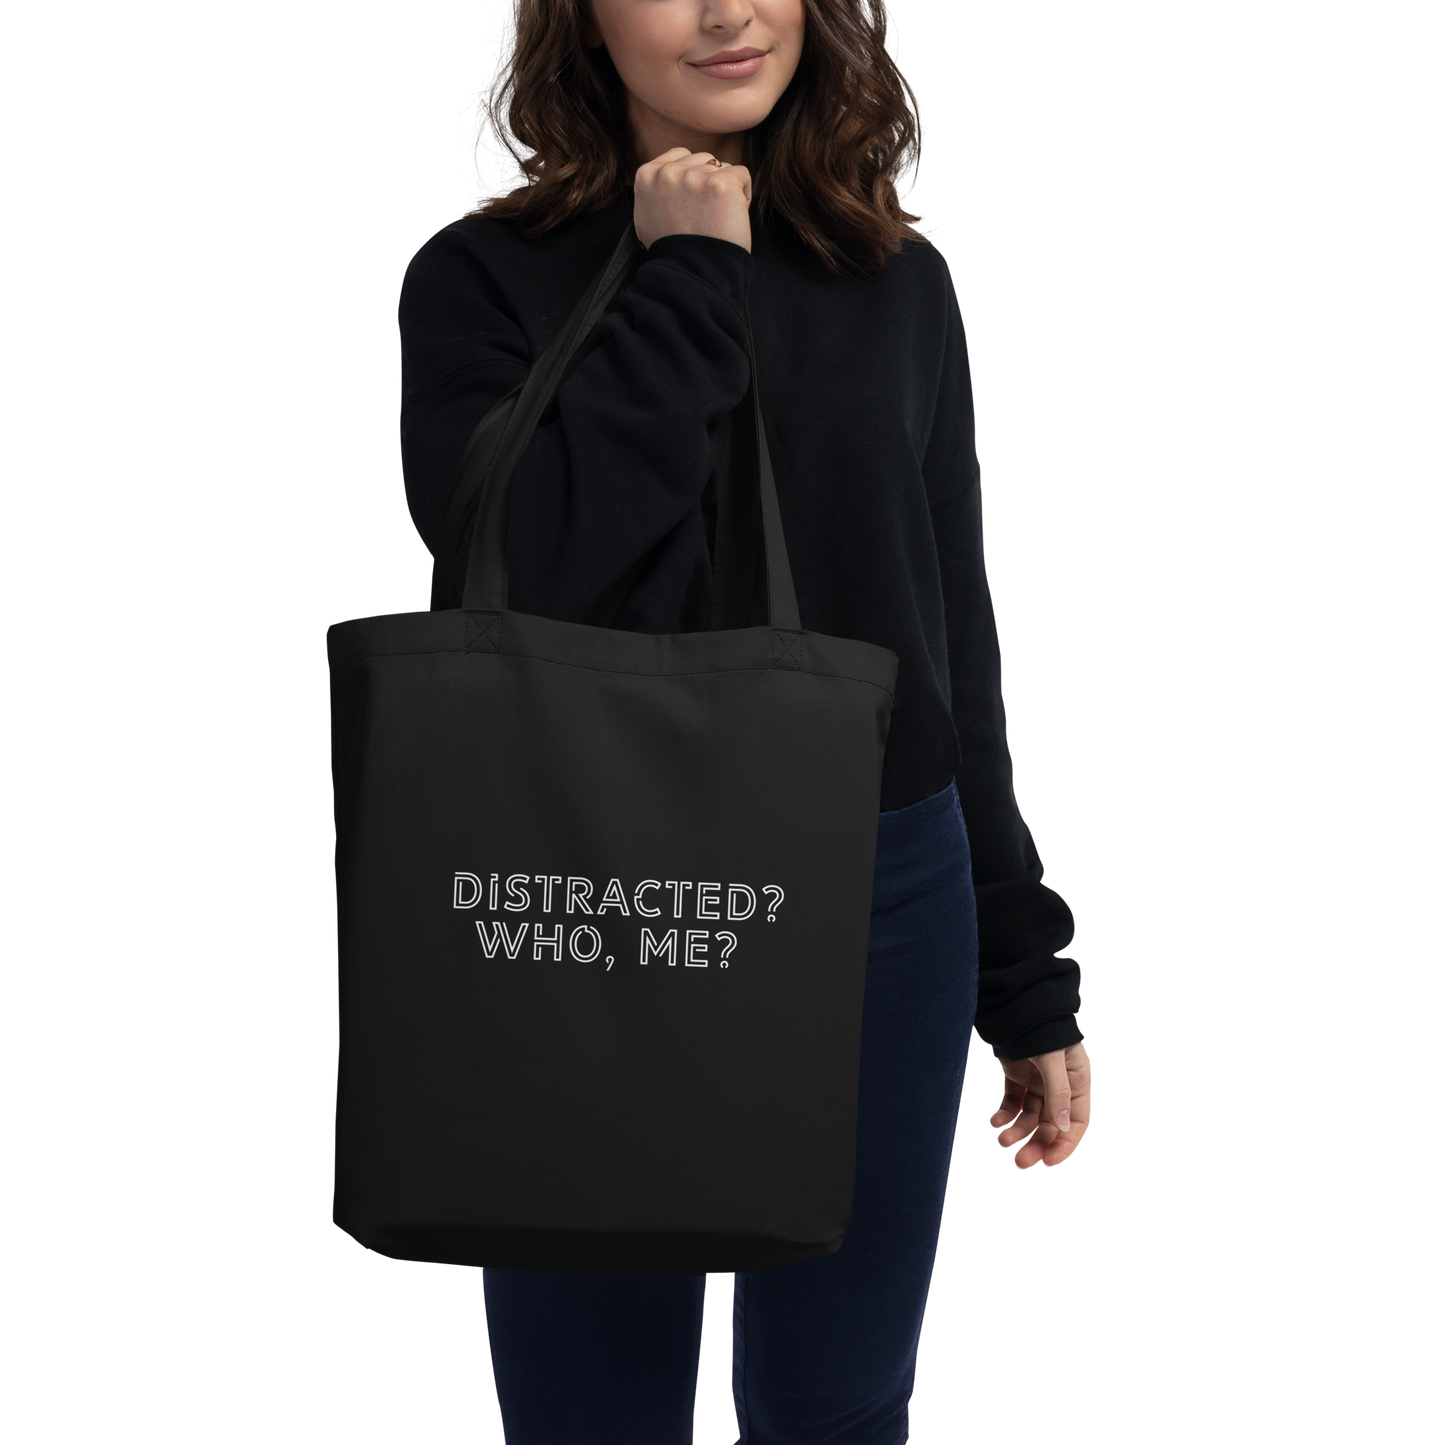 Distracted Who, Me? Tote